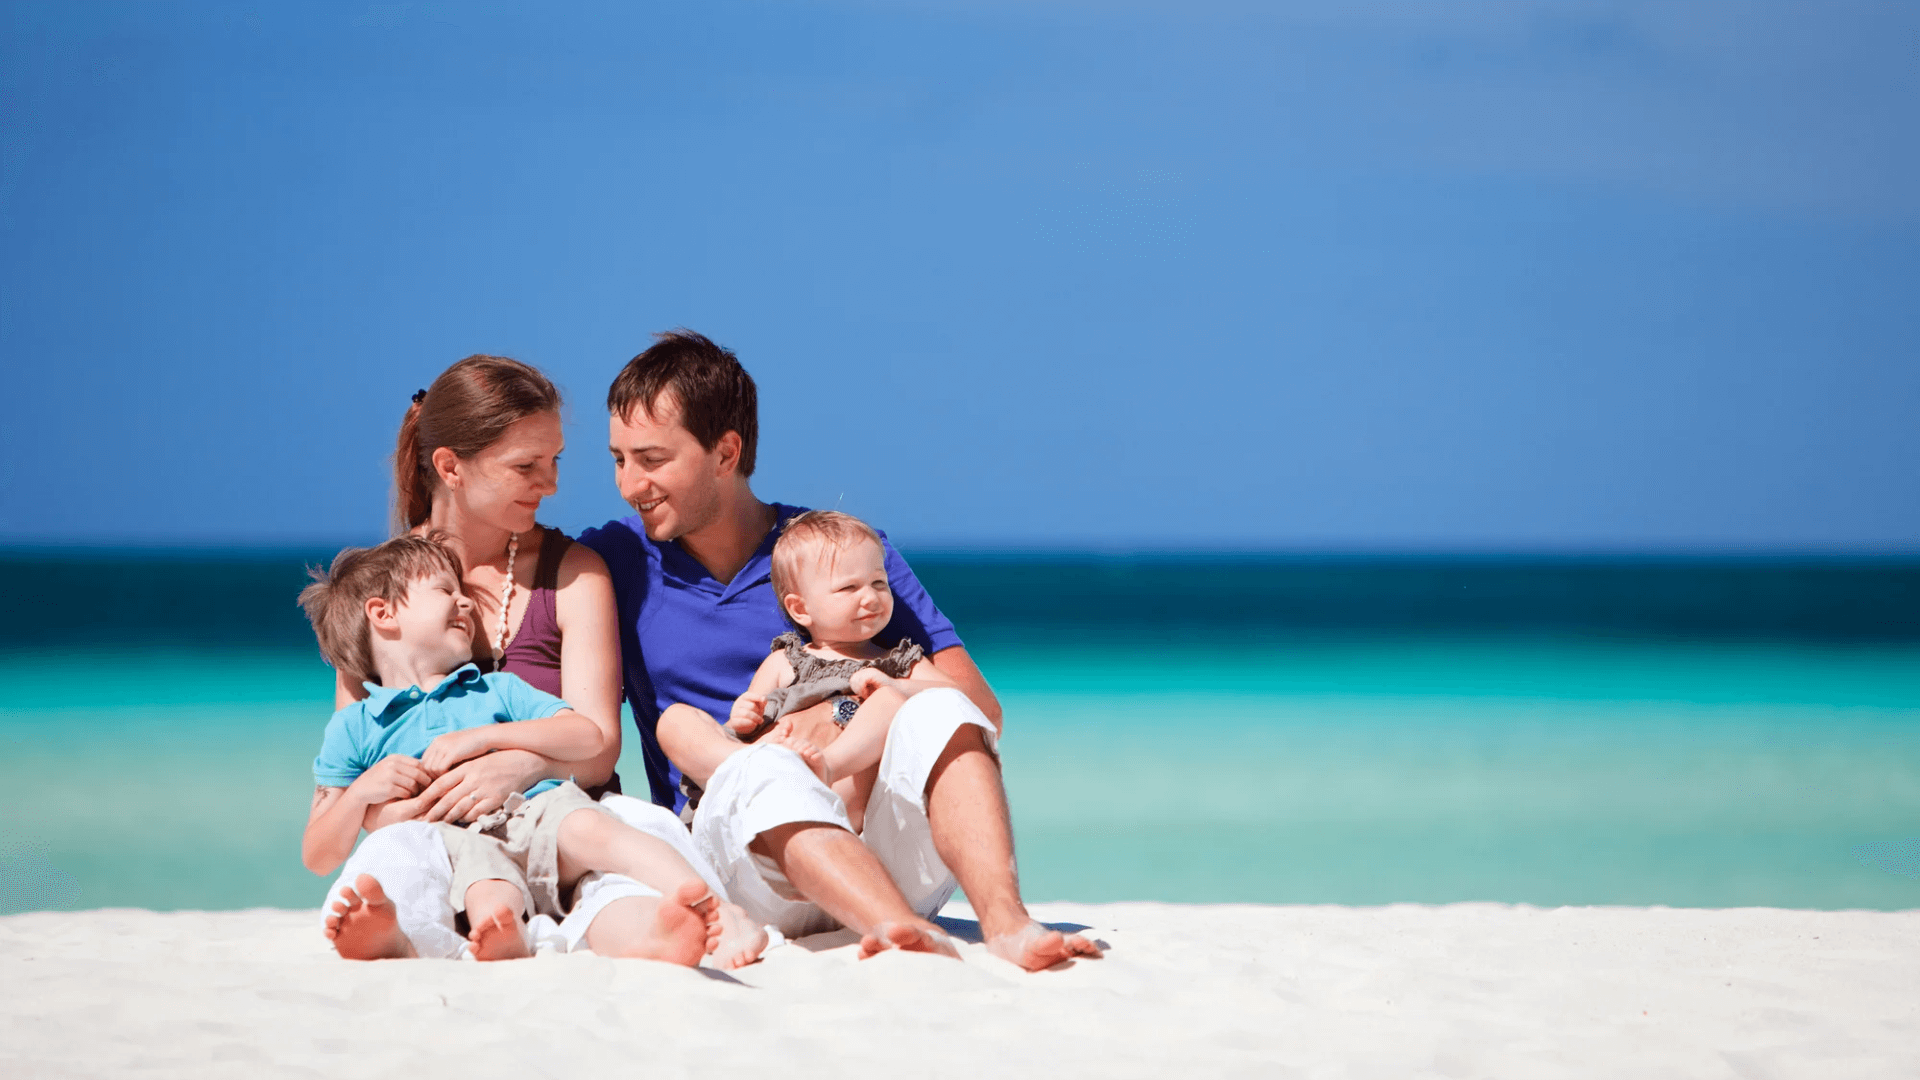 An image of a couple sat on the beach with two young children. life insurance for new parents